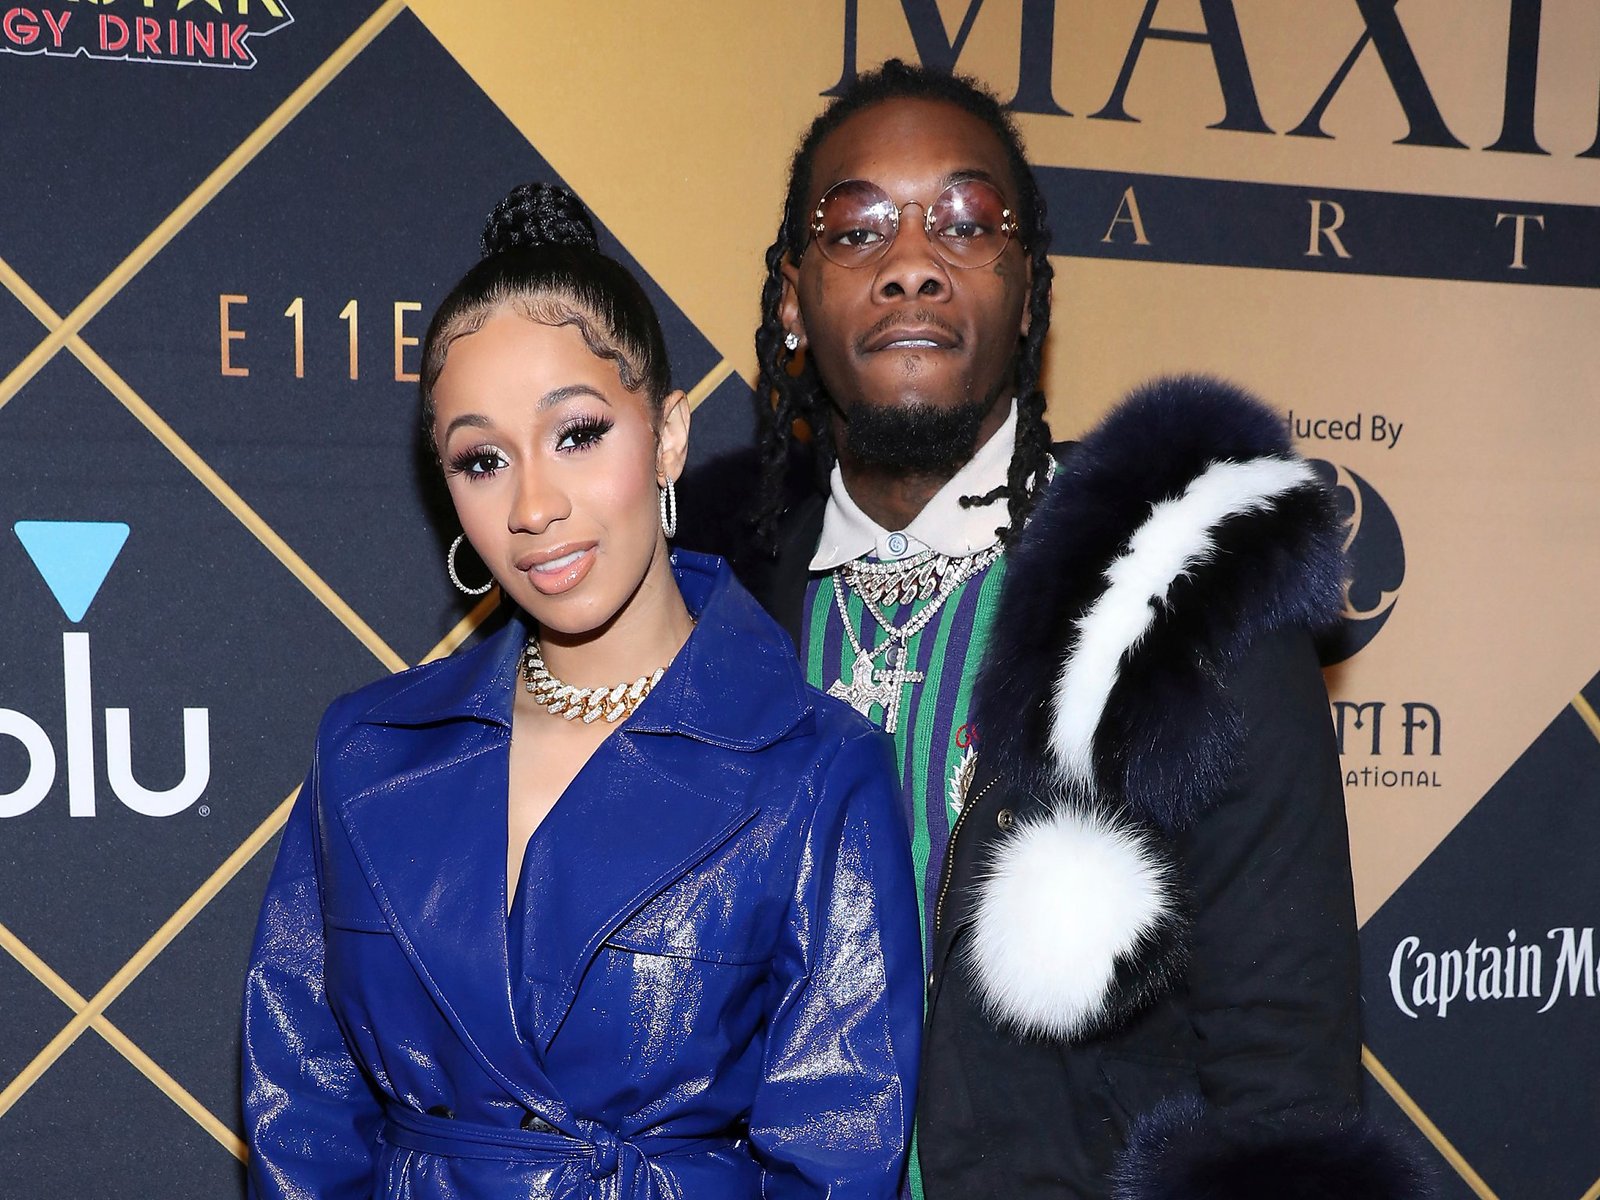 Cardi B, Offset team up with McDonald’s for Super Bowl ad and meal